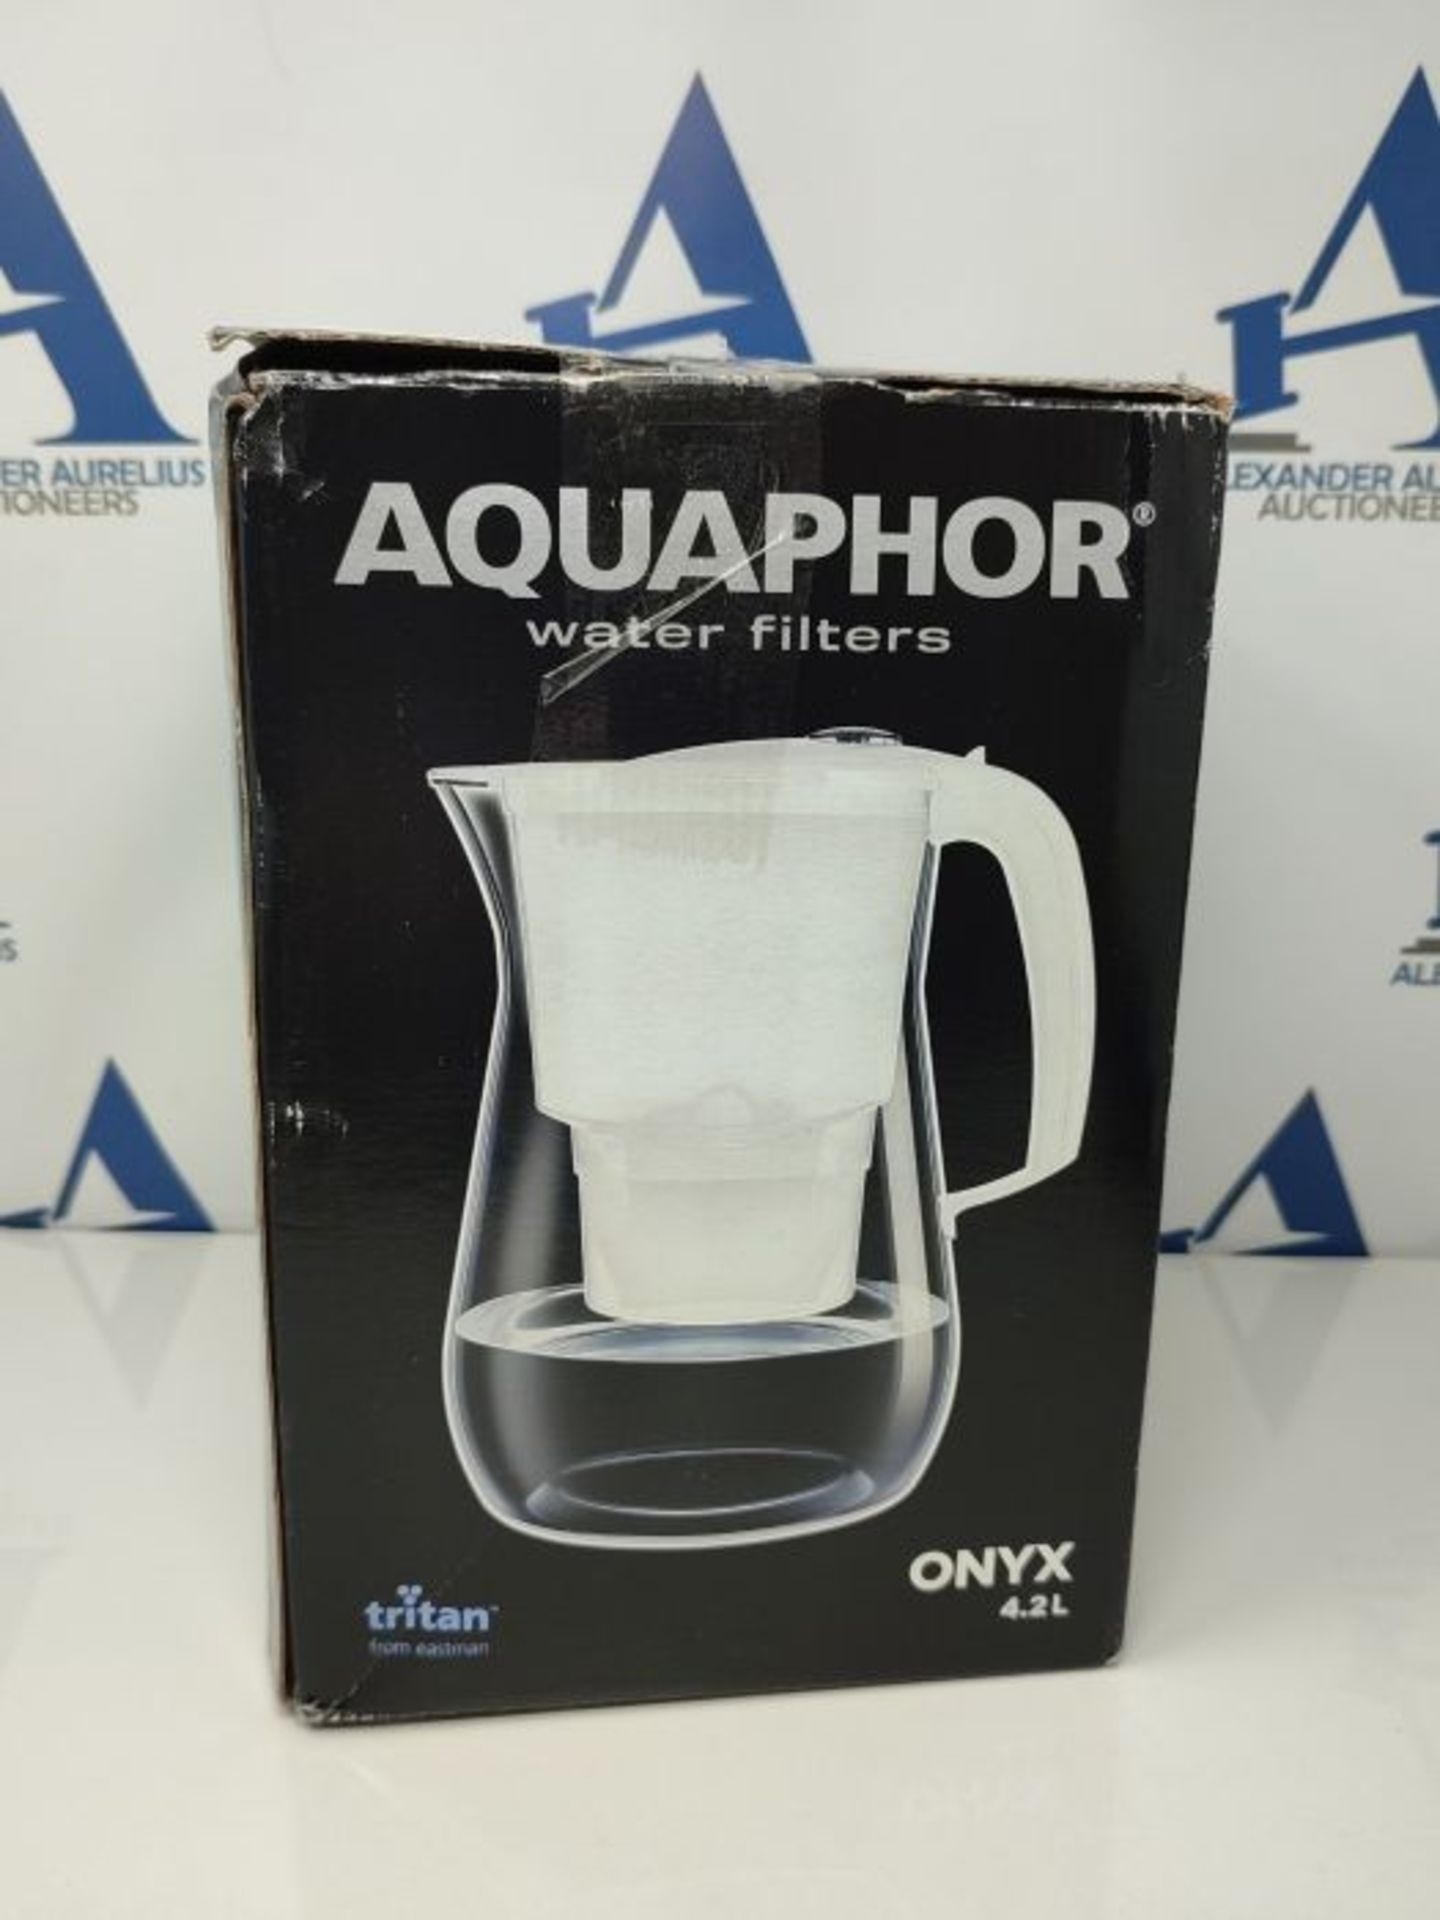 AQUAPHOR Onyx Water Filter Jug 4.2L, for reduction of limescale, Chlorine and other im - Image 2 of 3